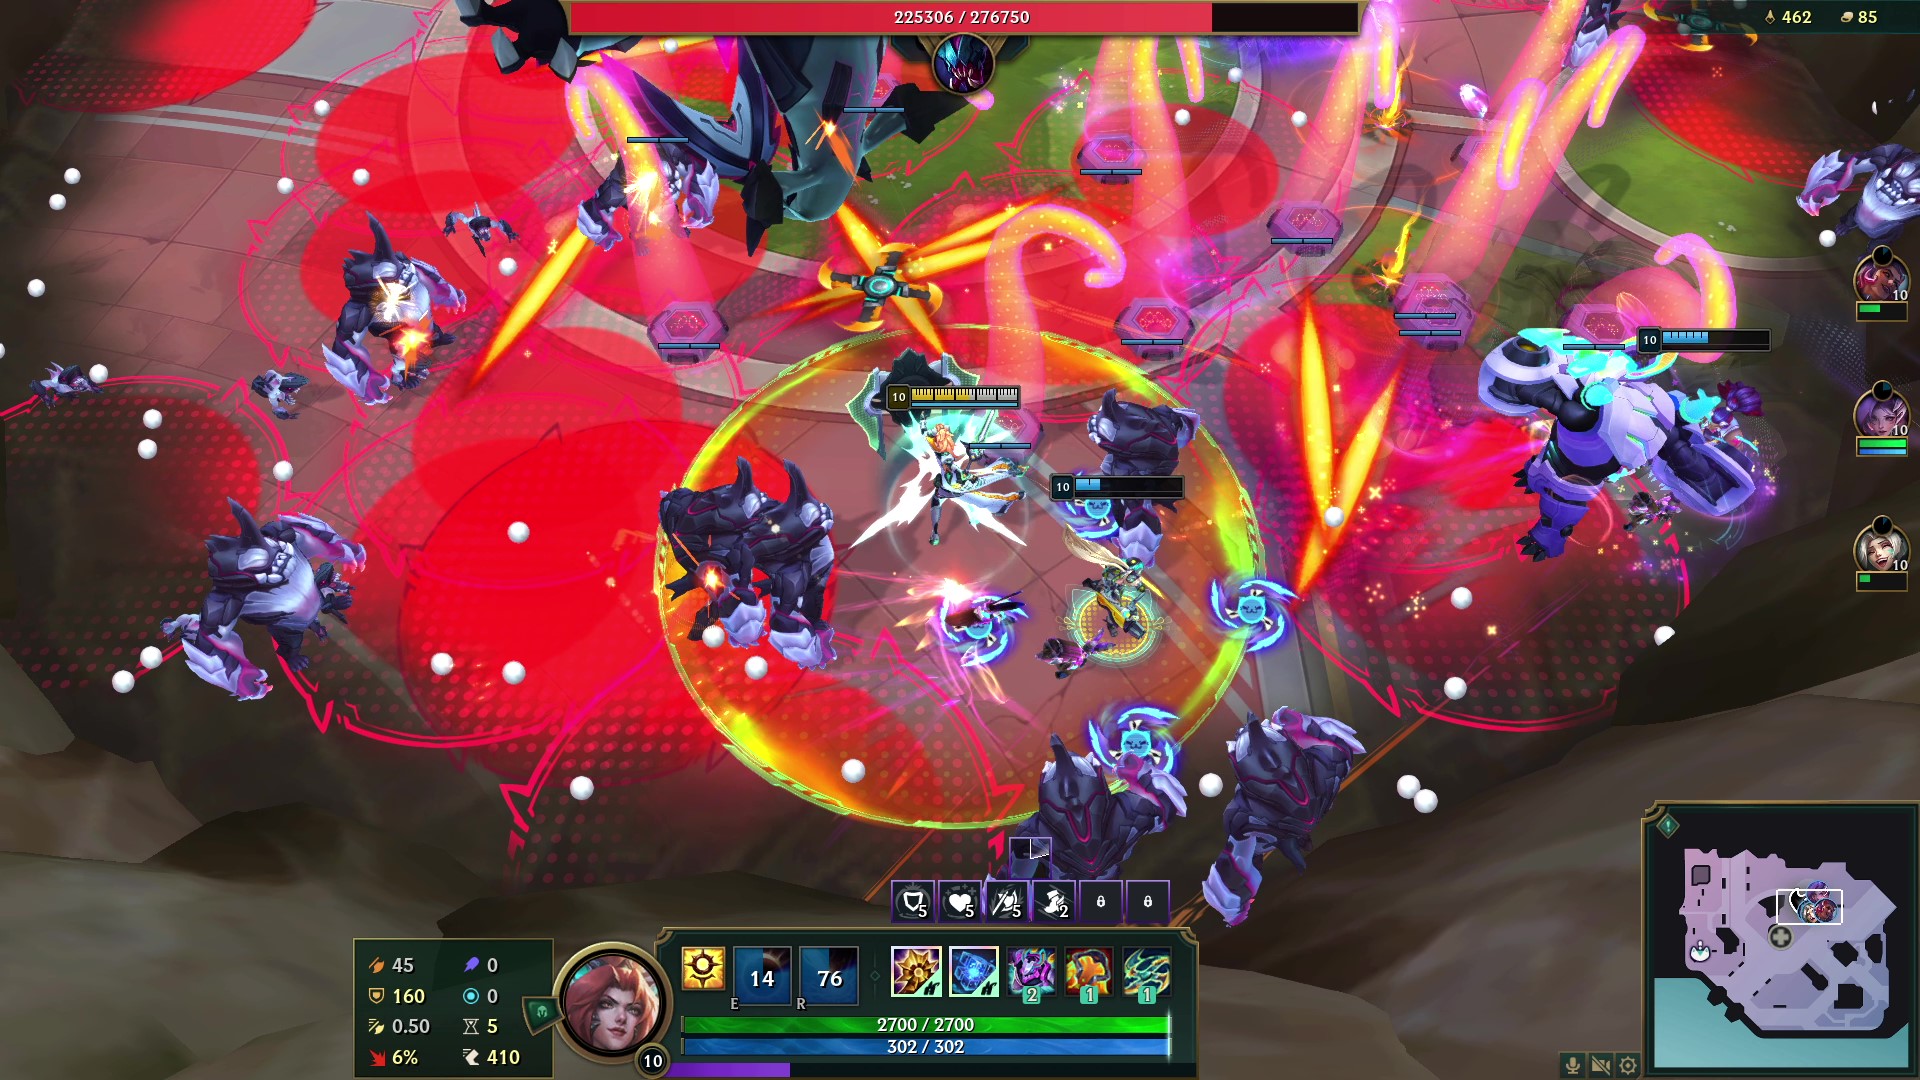 The team is wreathed in spectacular abilities in a shot from League of Legends' Swarm mode.